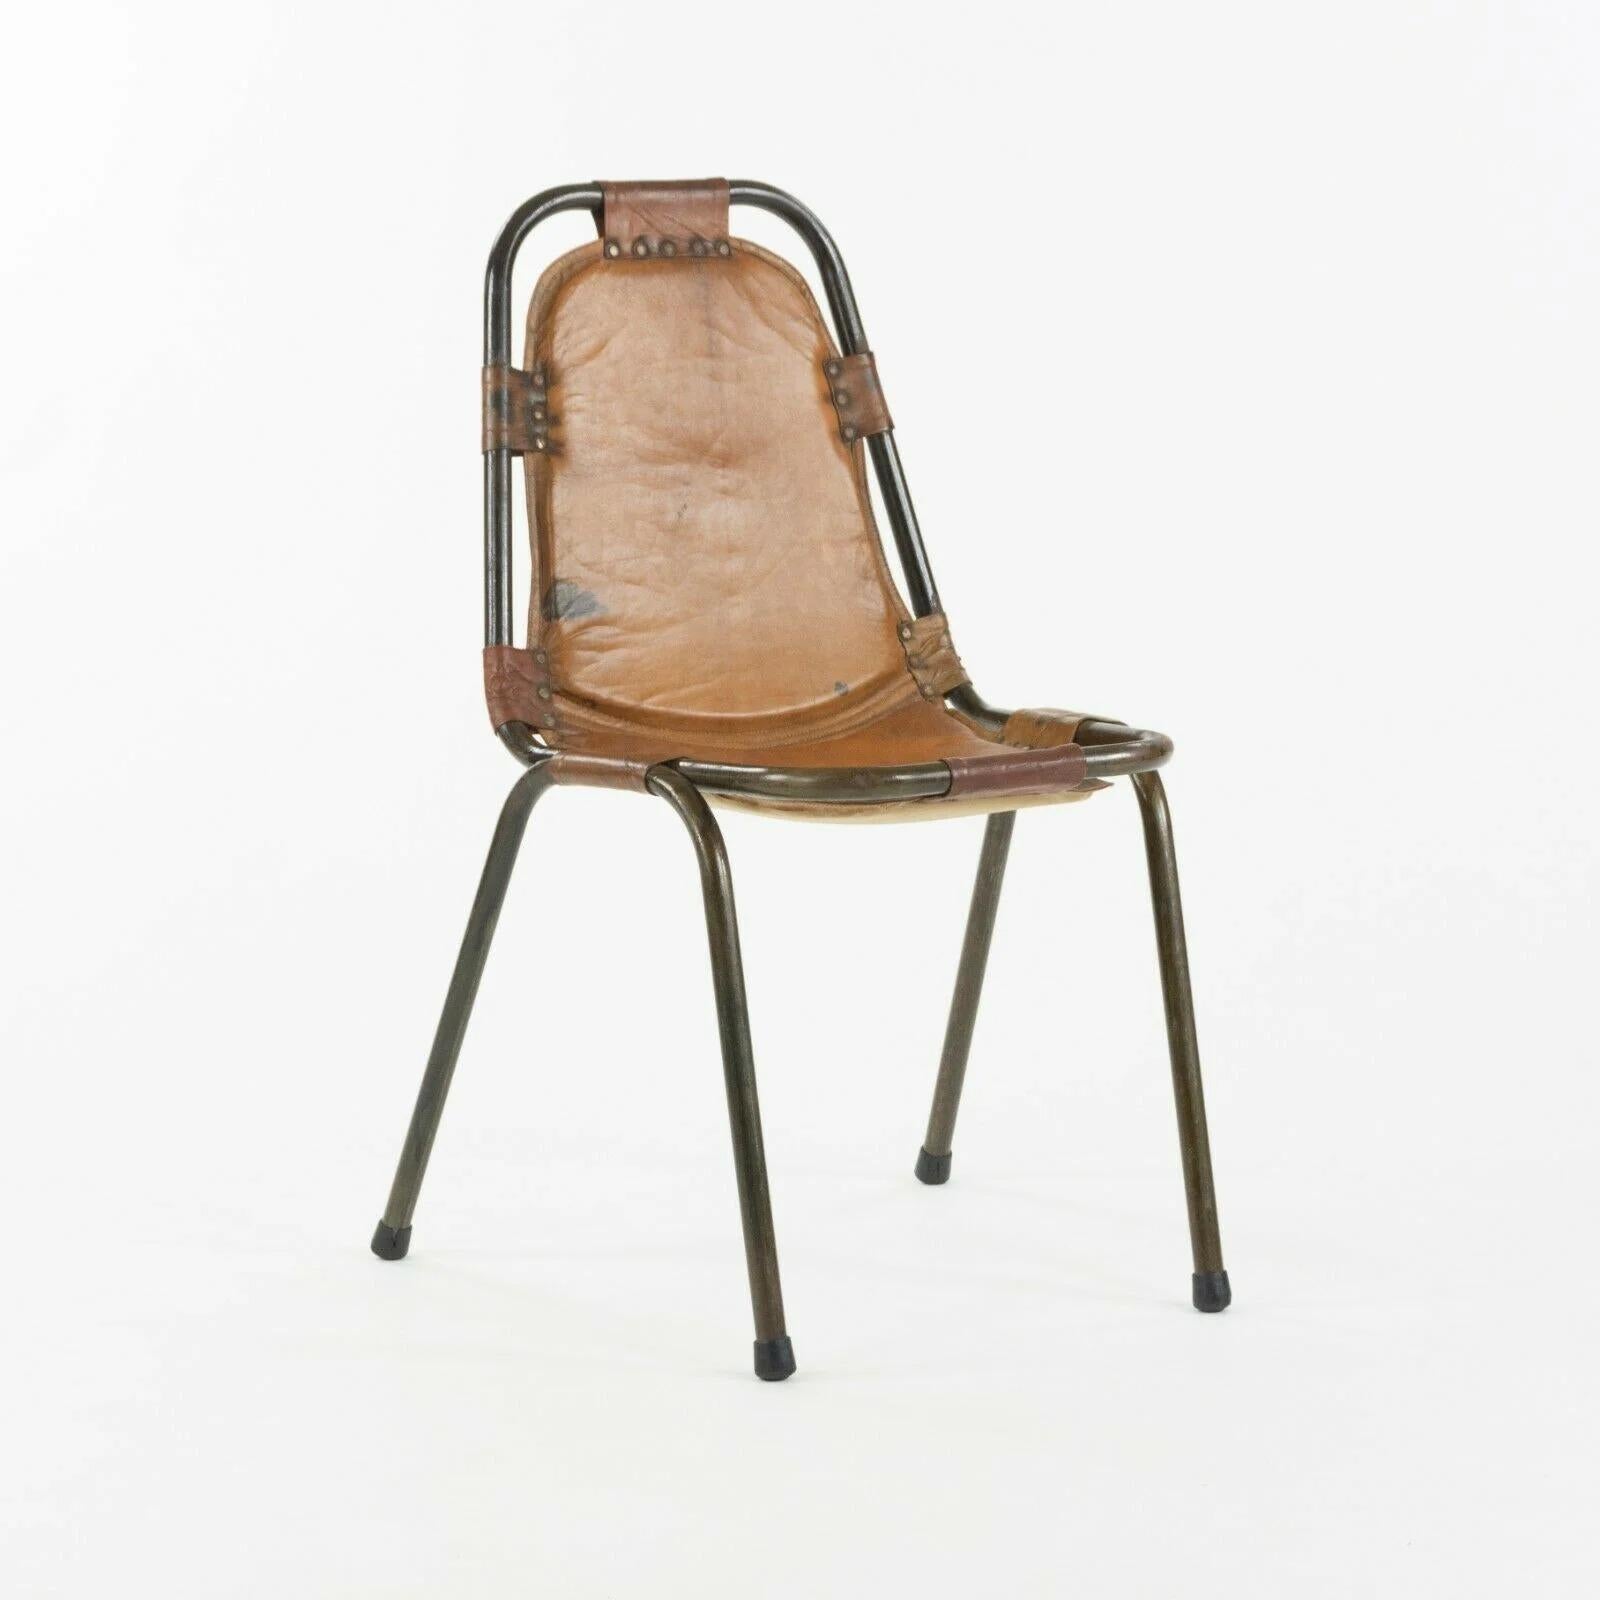 Italian 1960s Dal Vera Stacking Chairs for Charlotte Perriand Les Arcs Resort Set of 6 For Sale